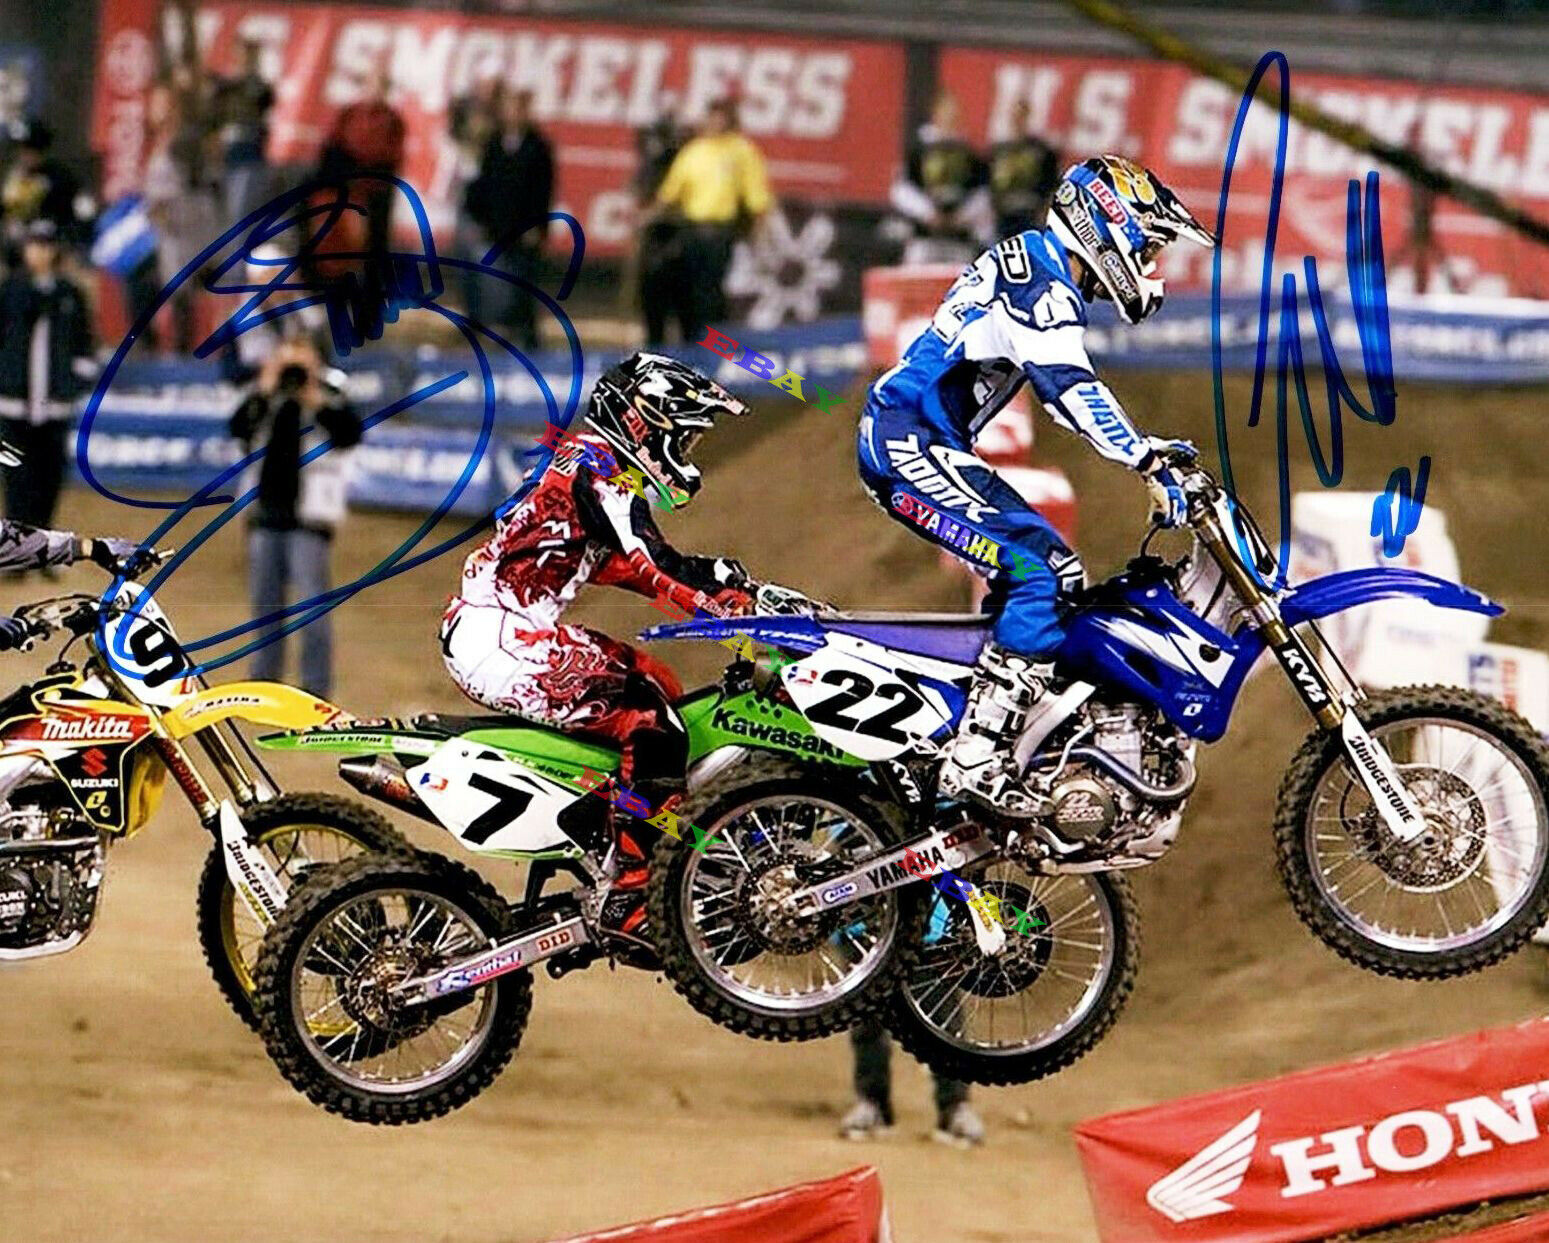 CHAD REED & JAMES BUBBA STEWART Motocross Autographed Signed 8x10 Photo Poster painting Reprint